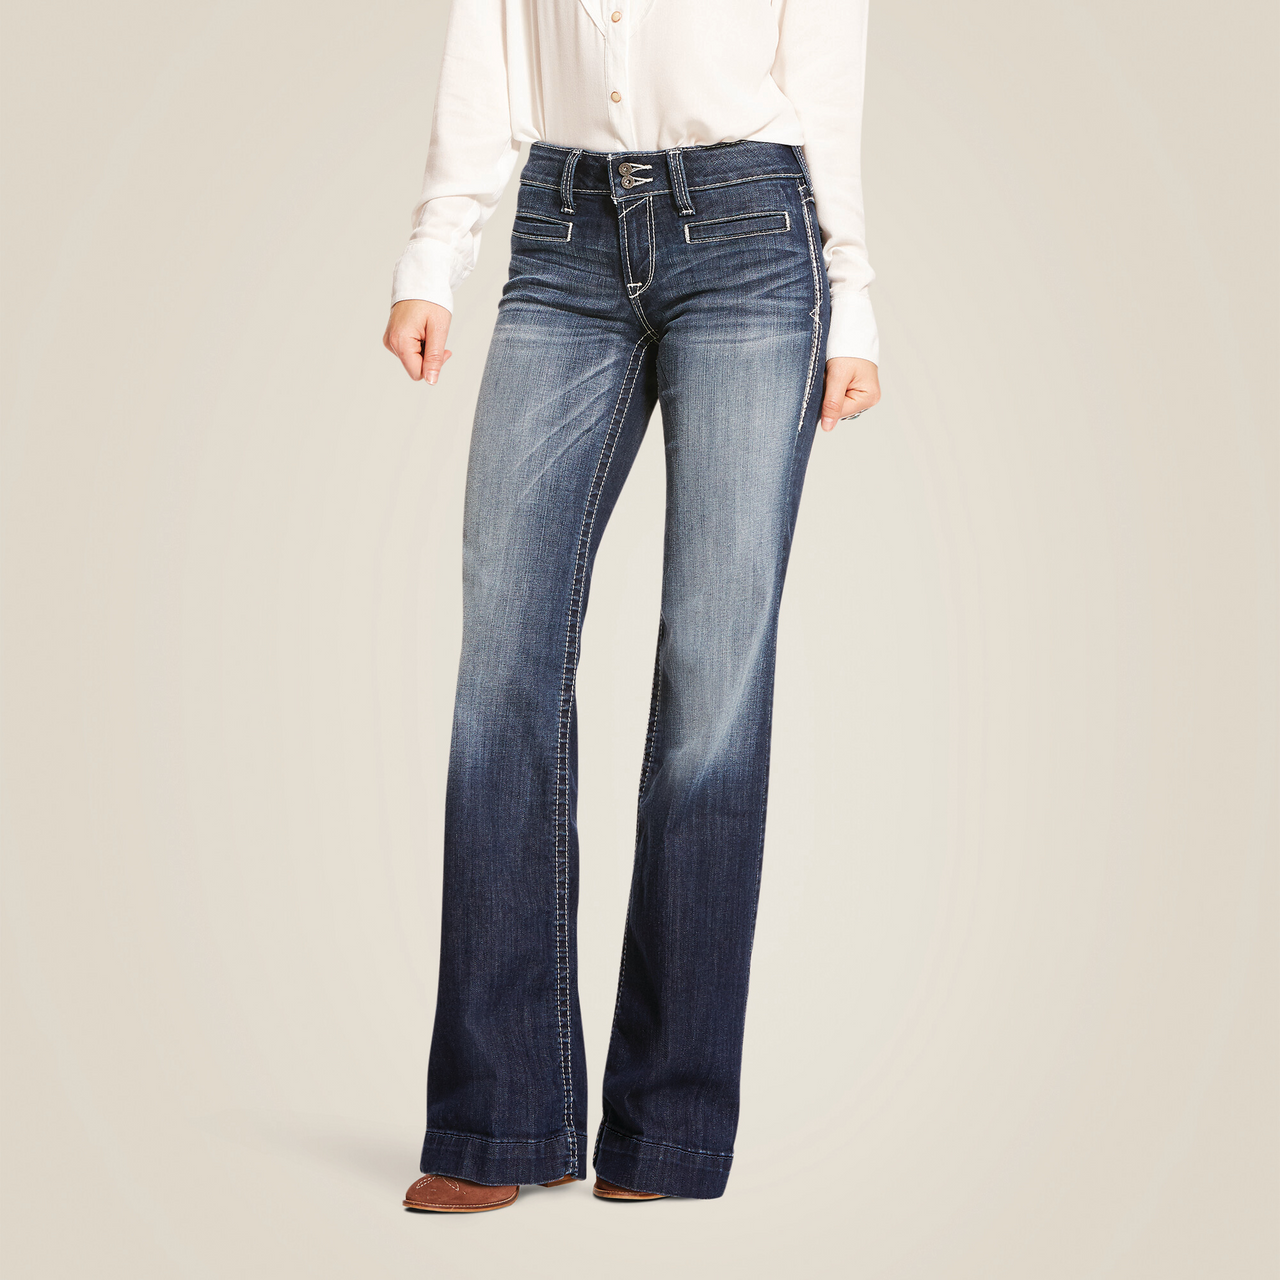 Ariat Women's Trouser Mid Rise Stretch Entwined Wide Leg Jeans - Marine